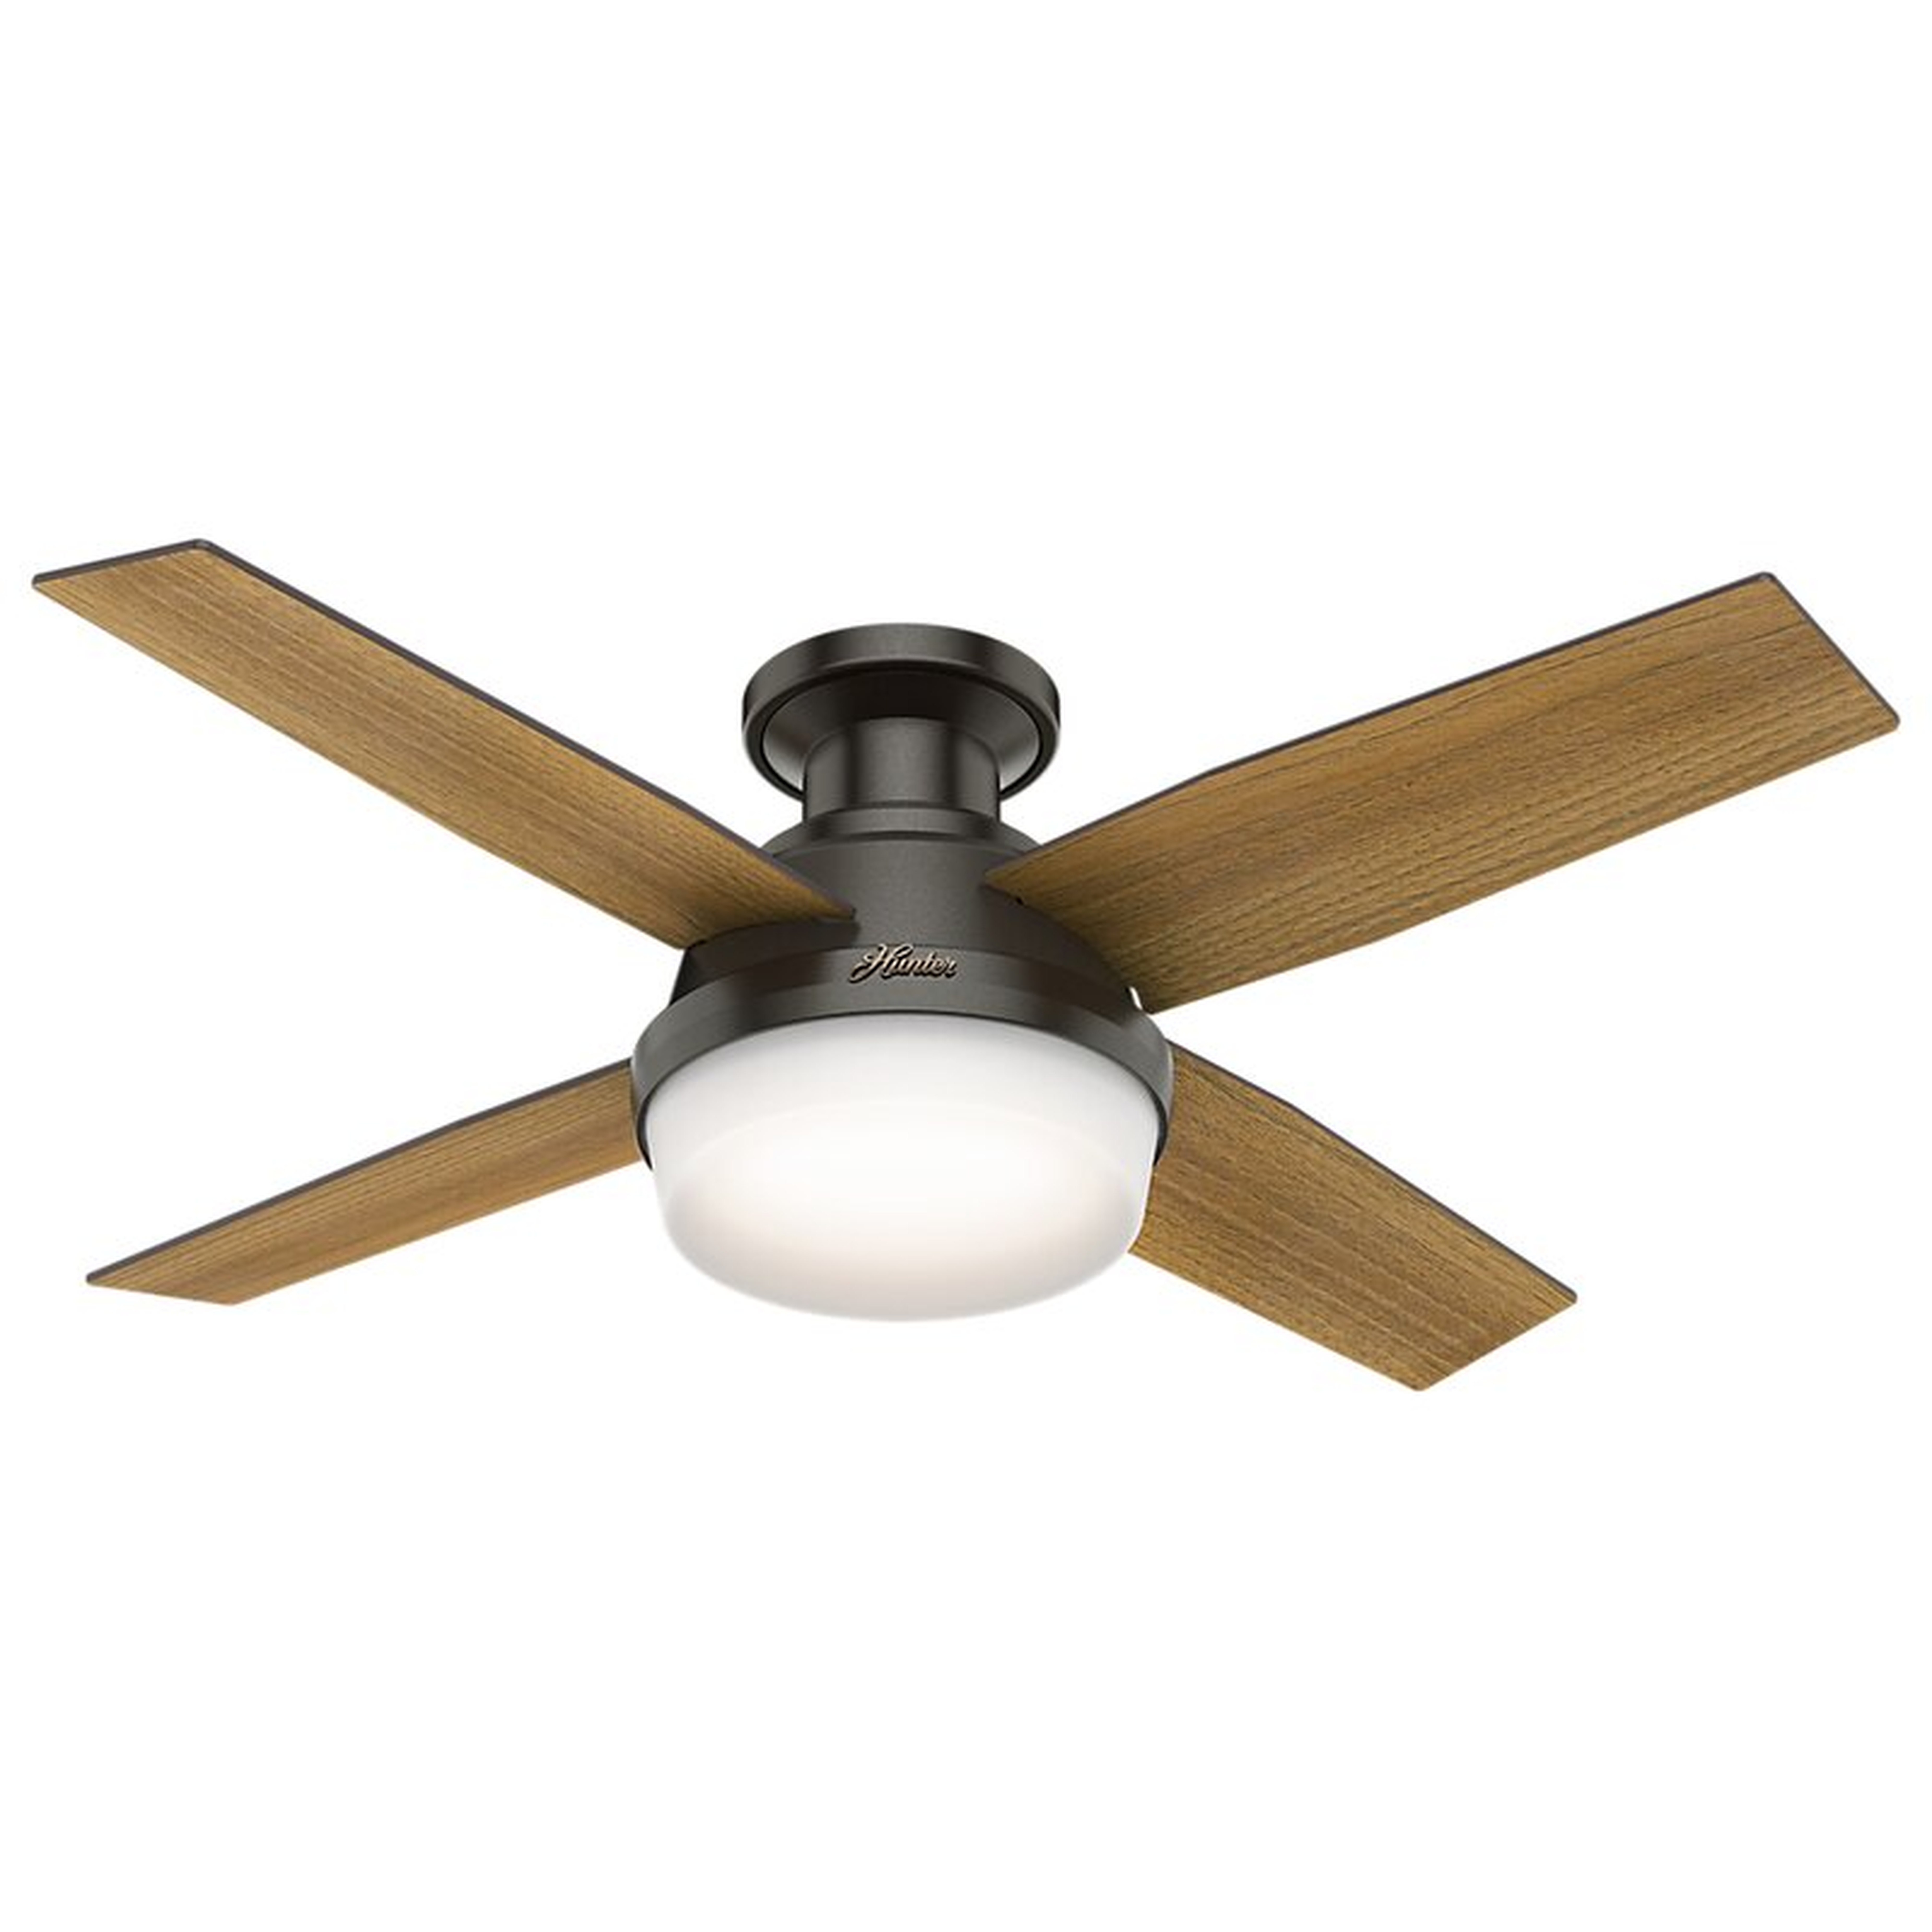 44" Dempsey Low Profile 4-Blade Ceiling Fan with Remote, Light Kit Included - AllModern